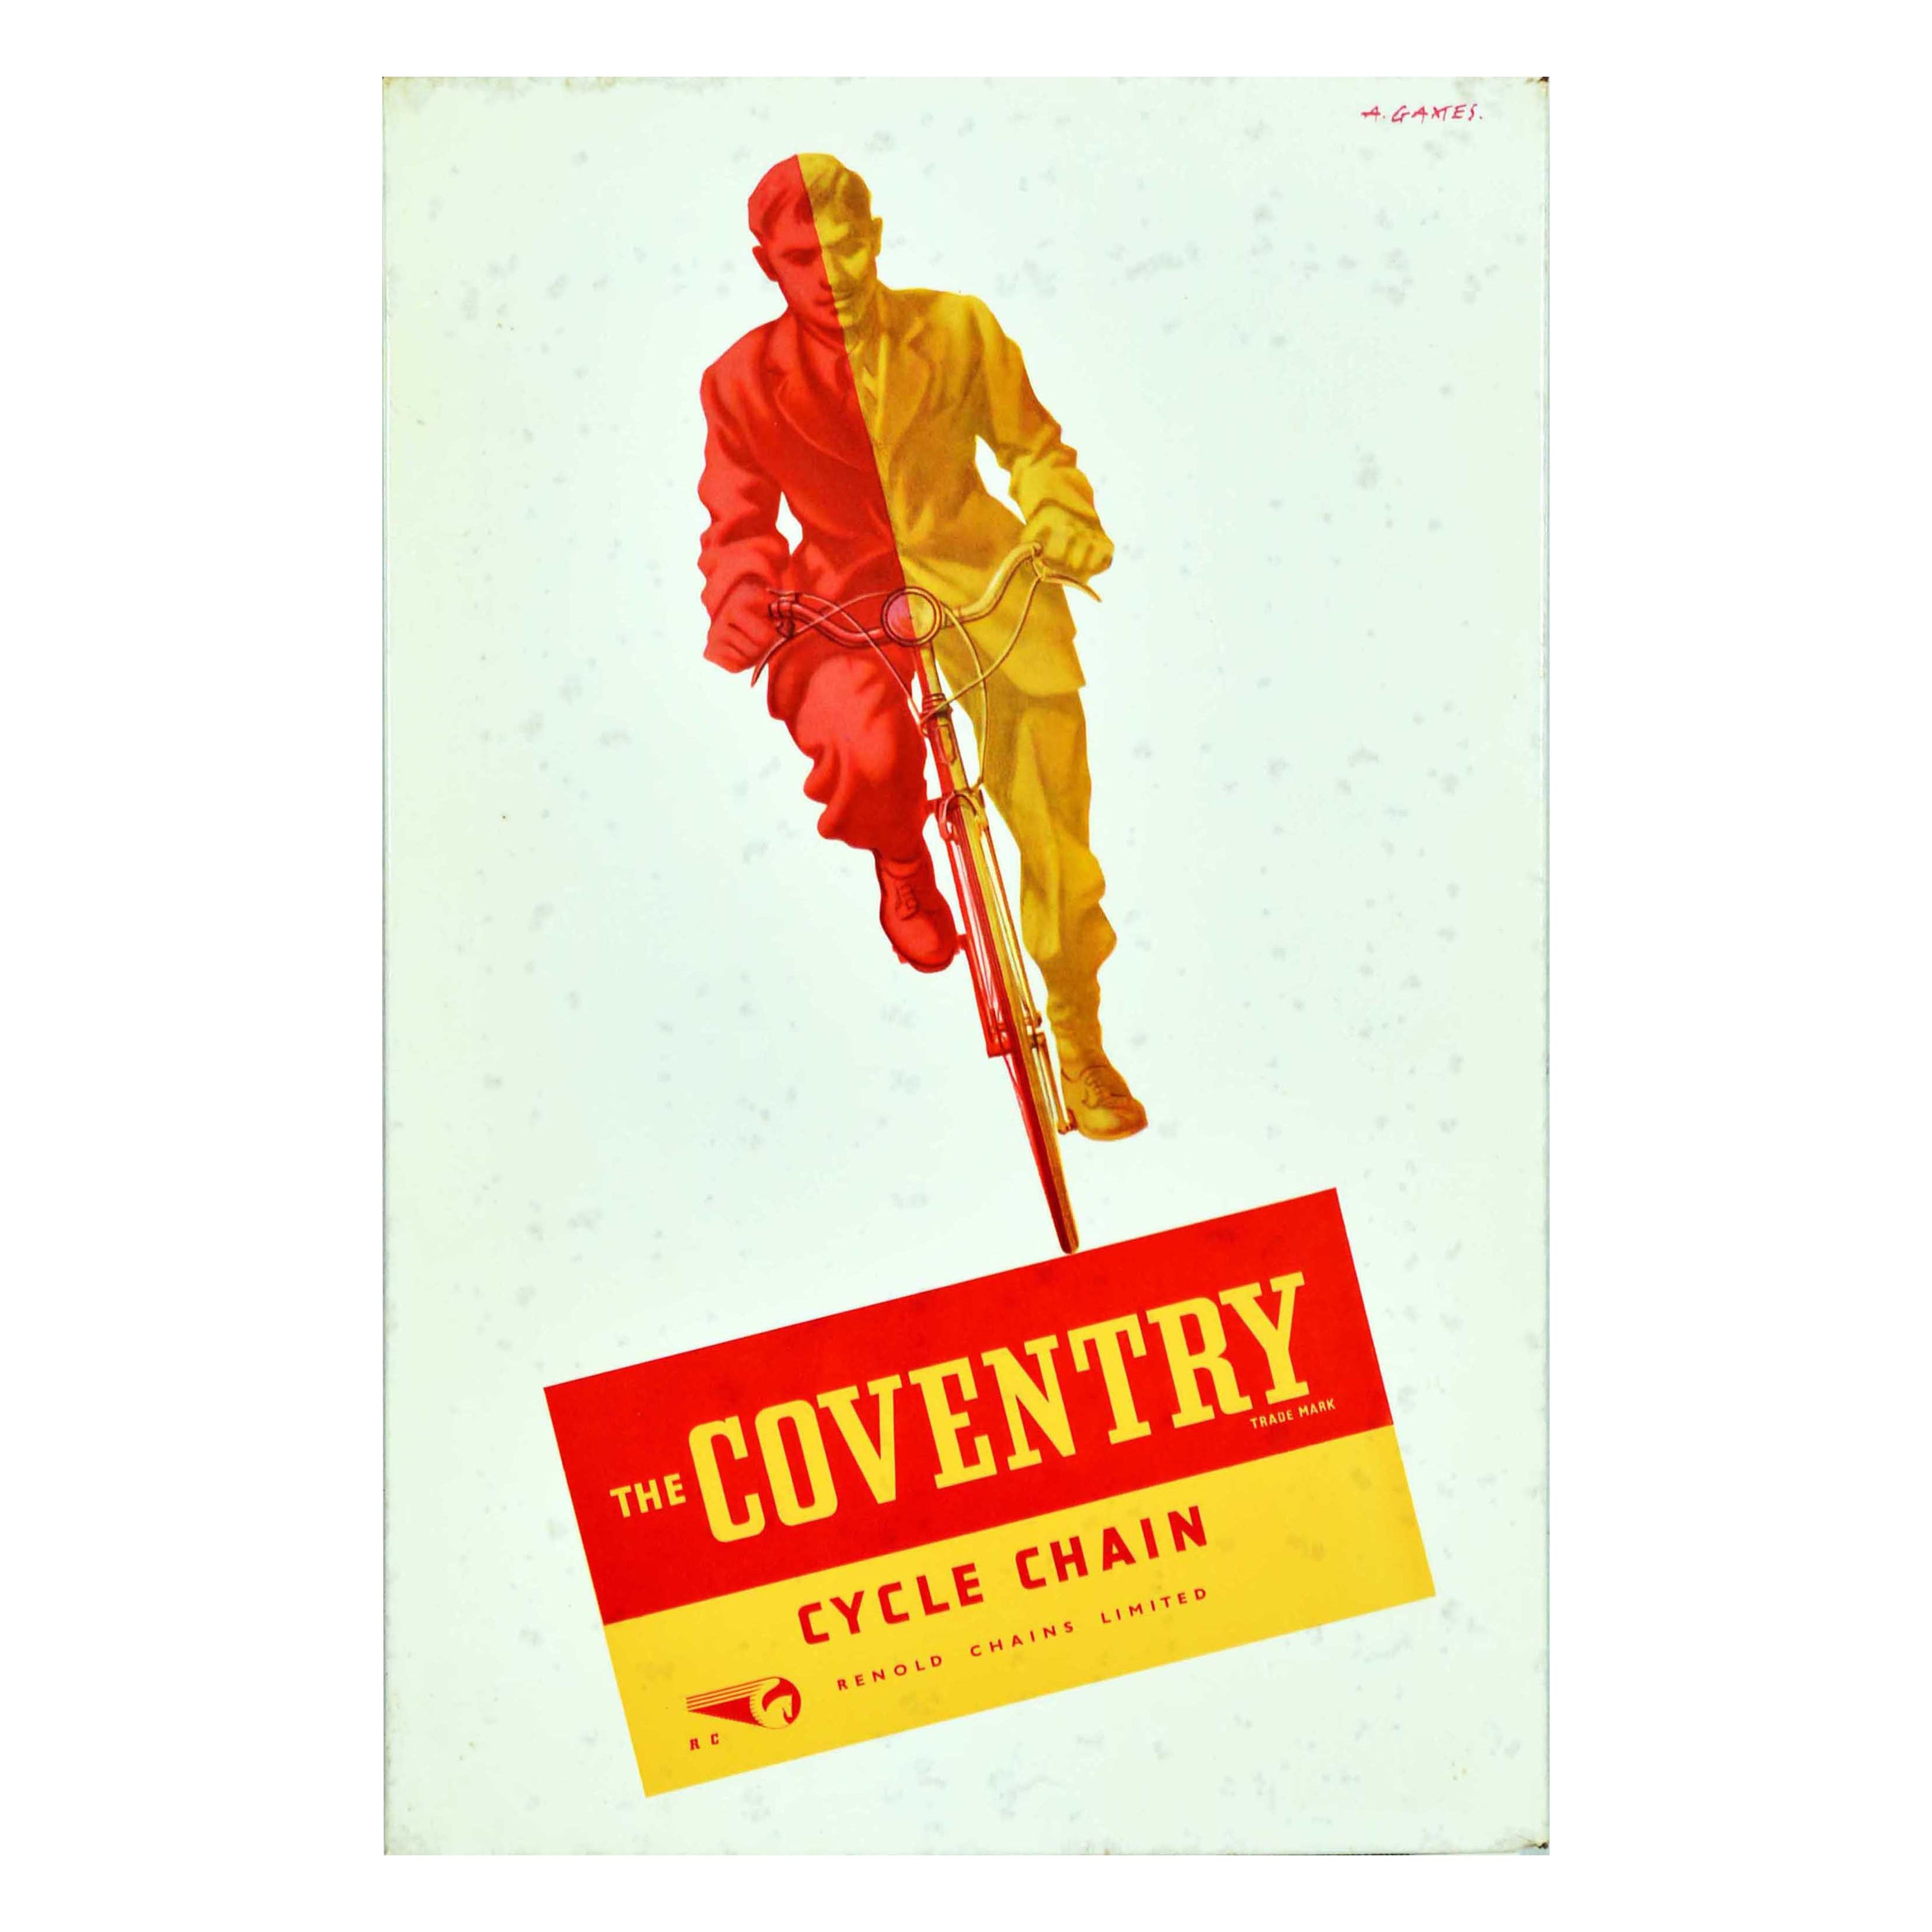 Original-Vintage-Poster, Renold Coventry Cycle Chain Abram Games, Radrennen